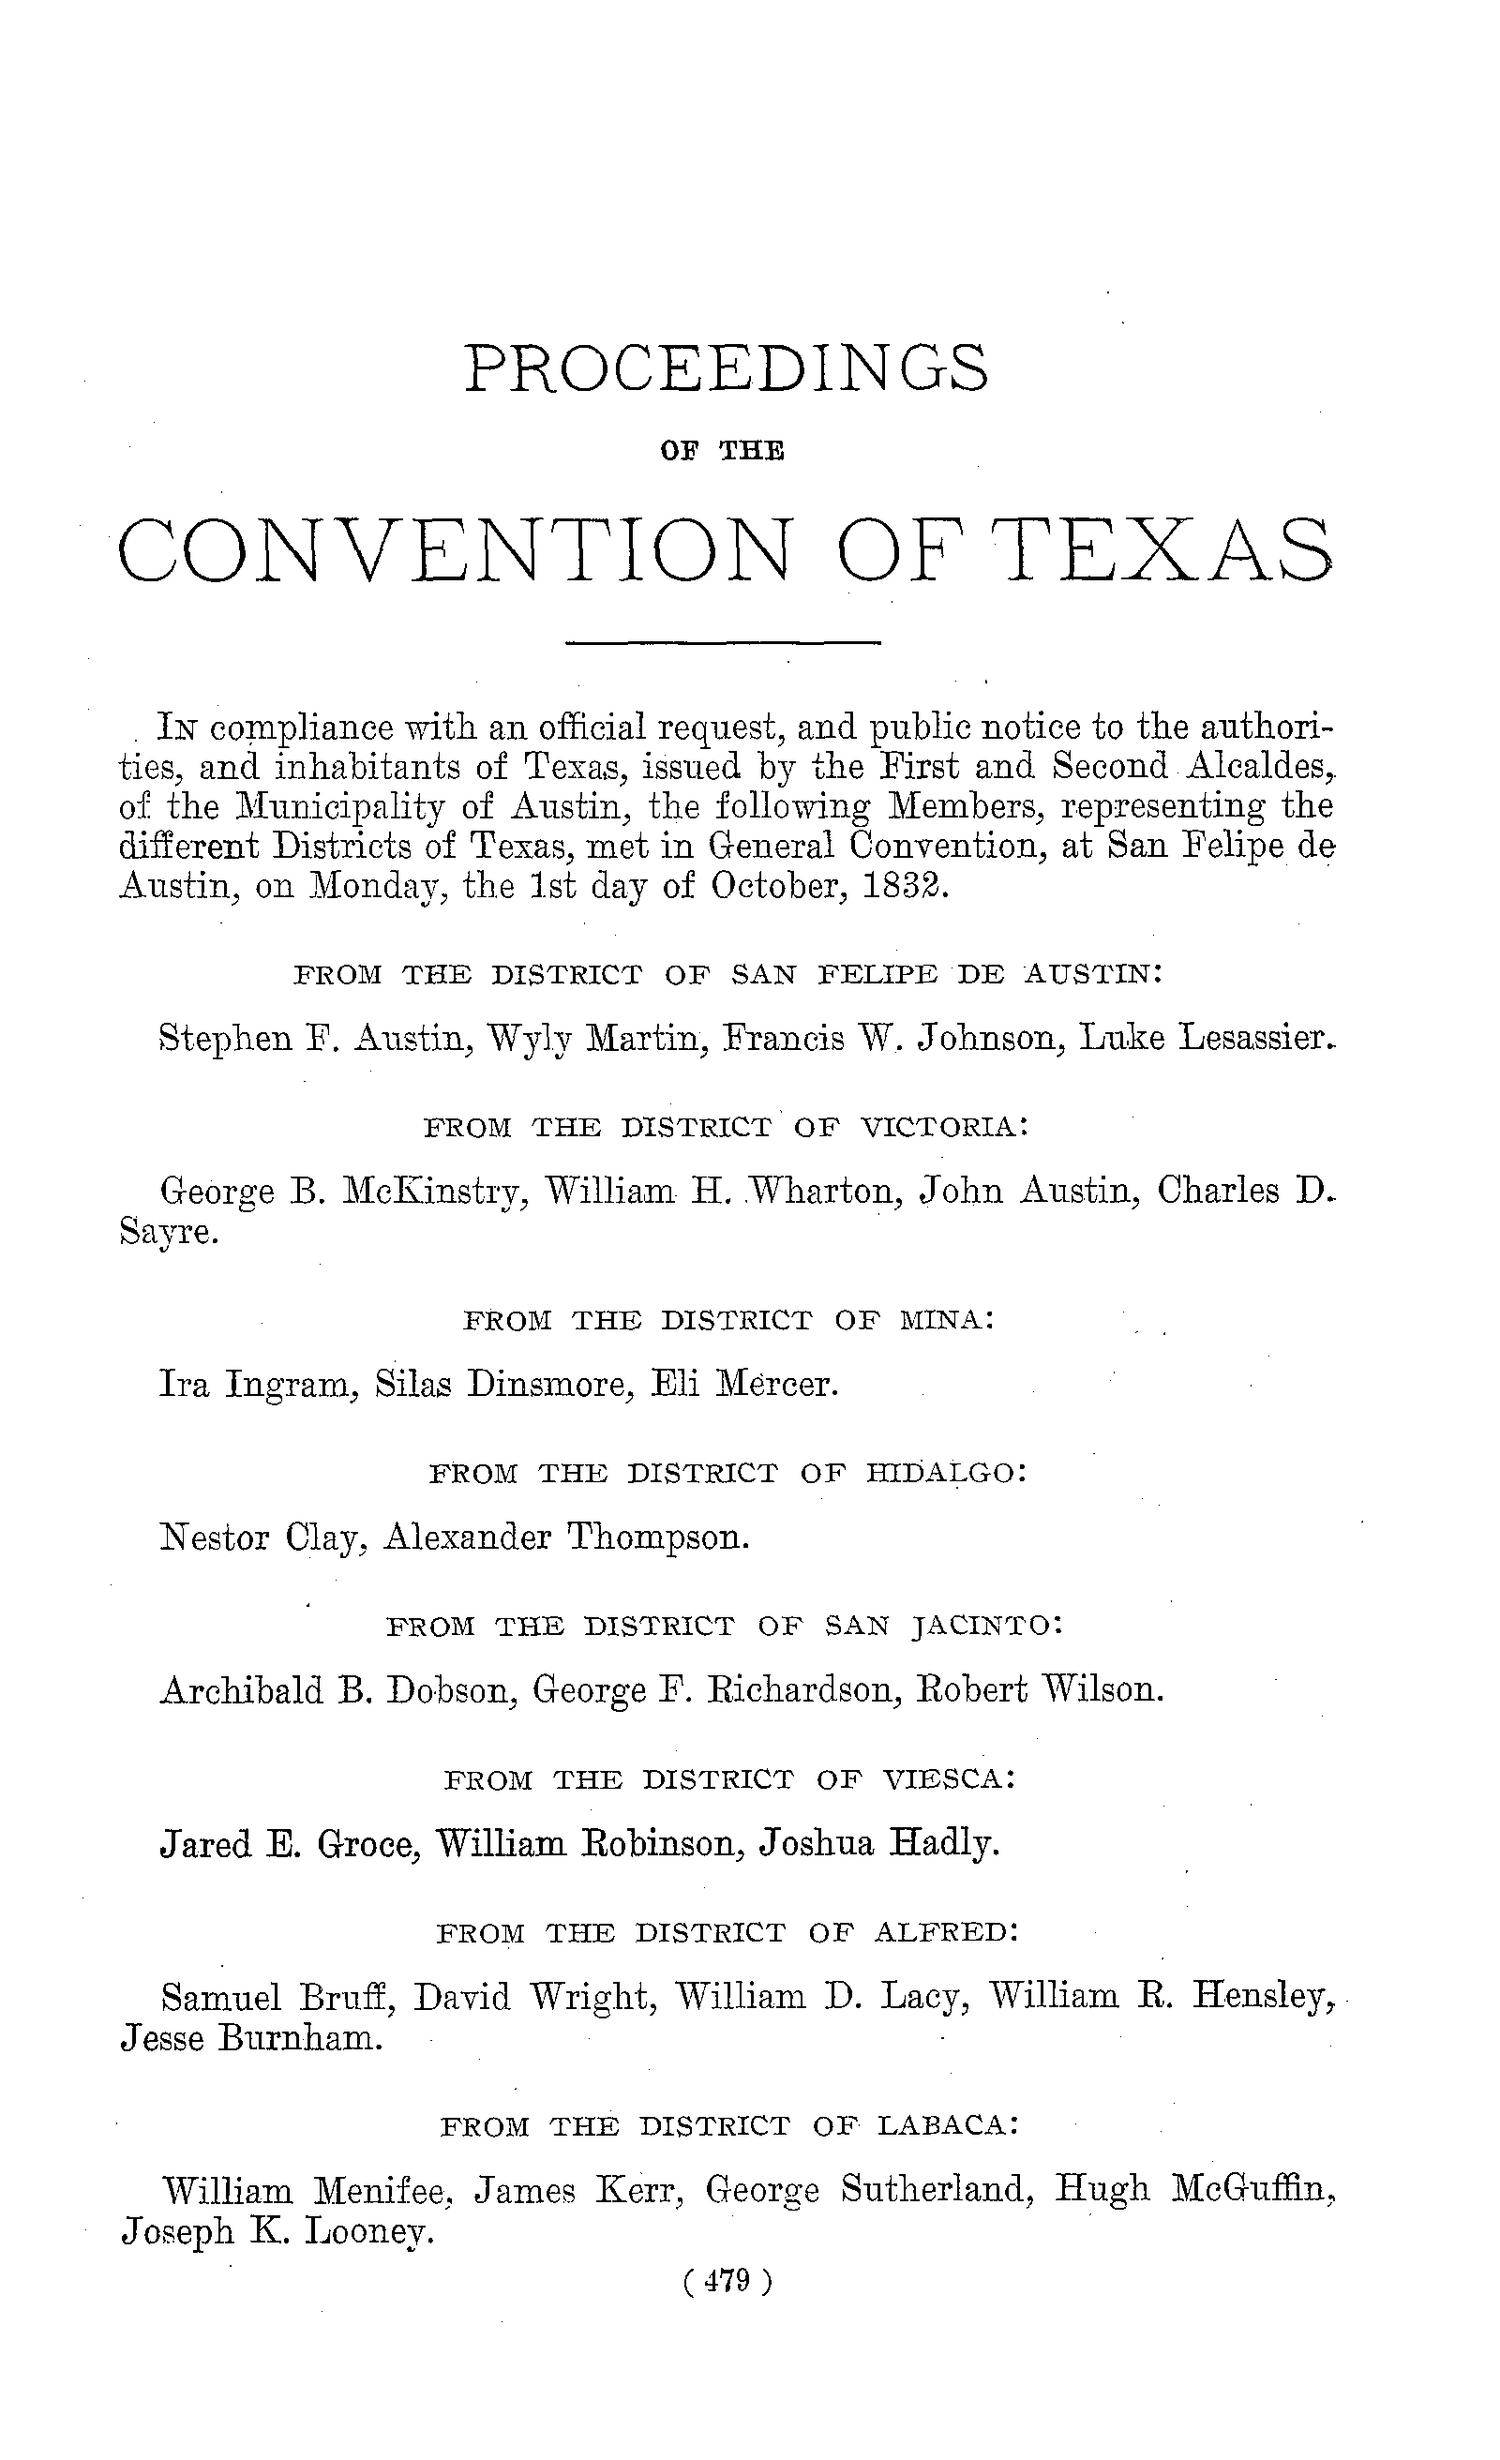 The Laws of Texas, 1822-1897 Volume 1
                                                
                                                    479
                                                